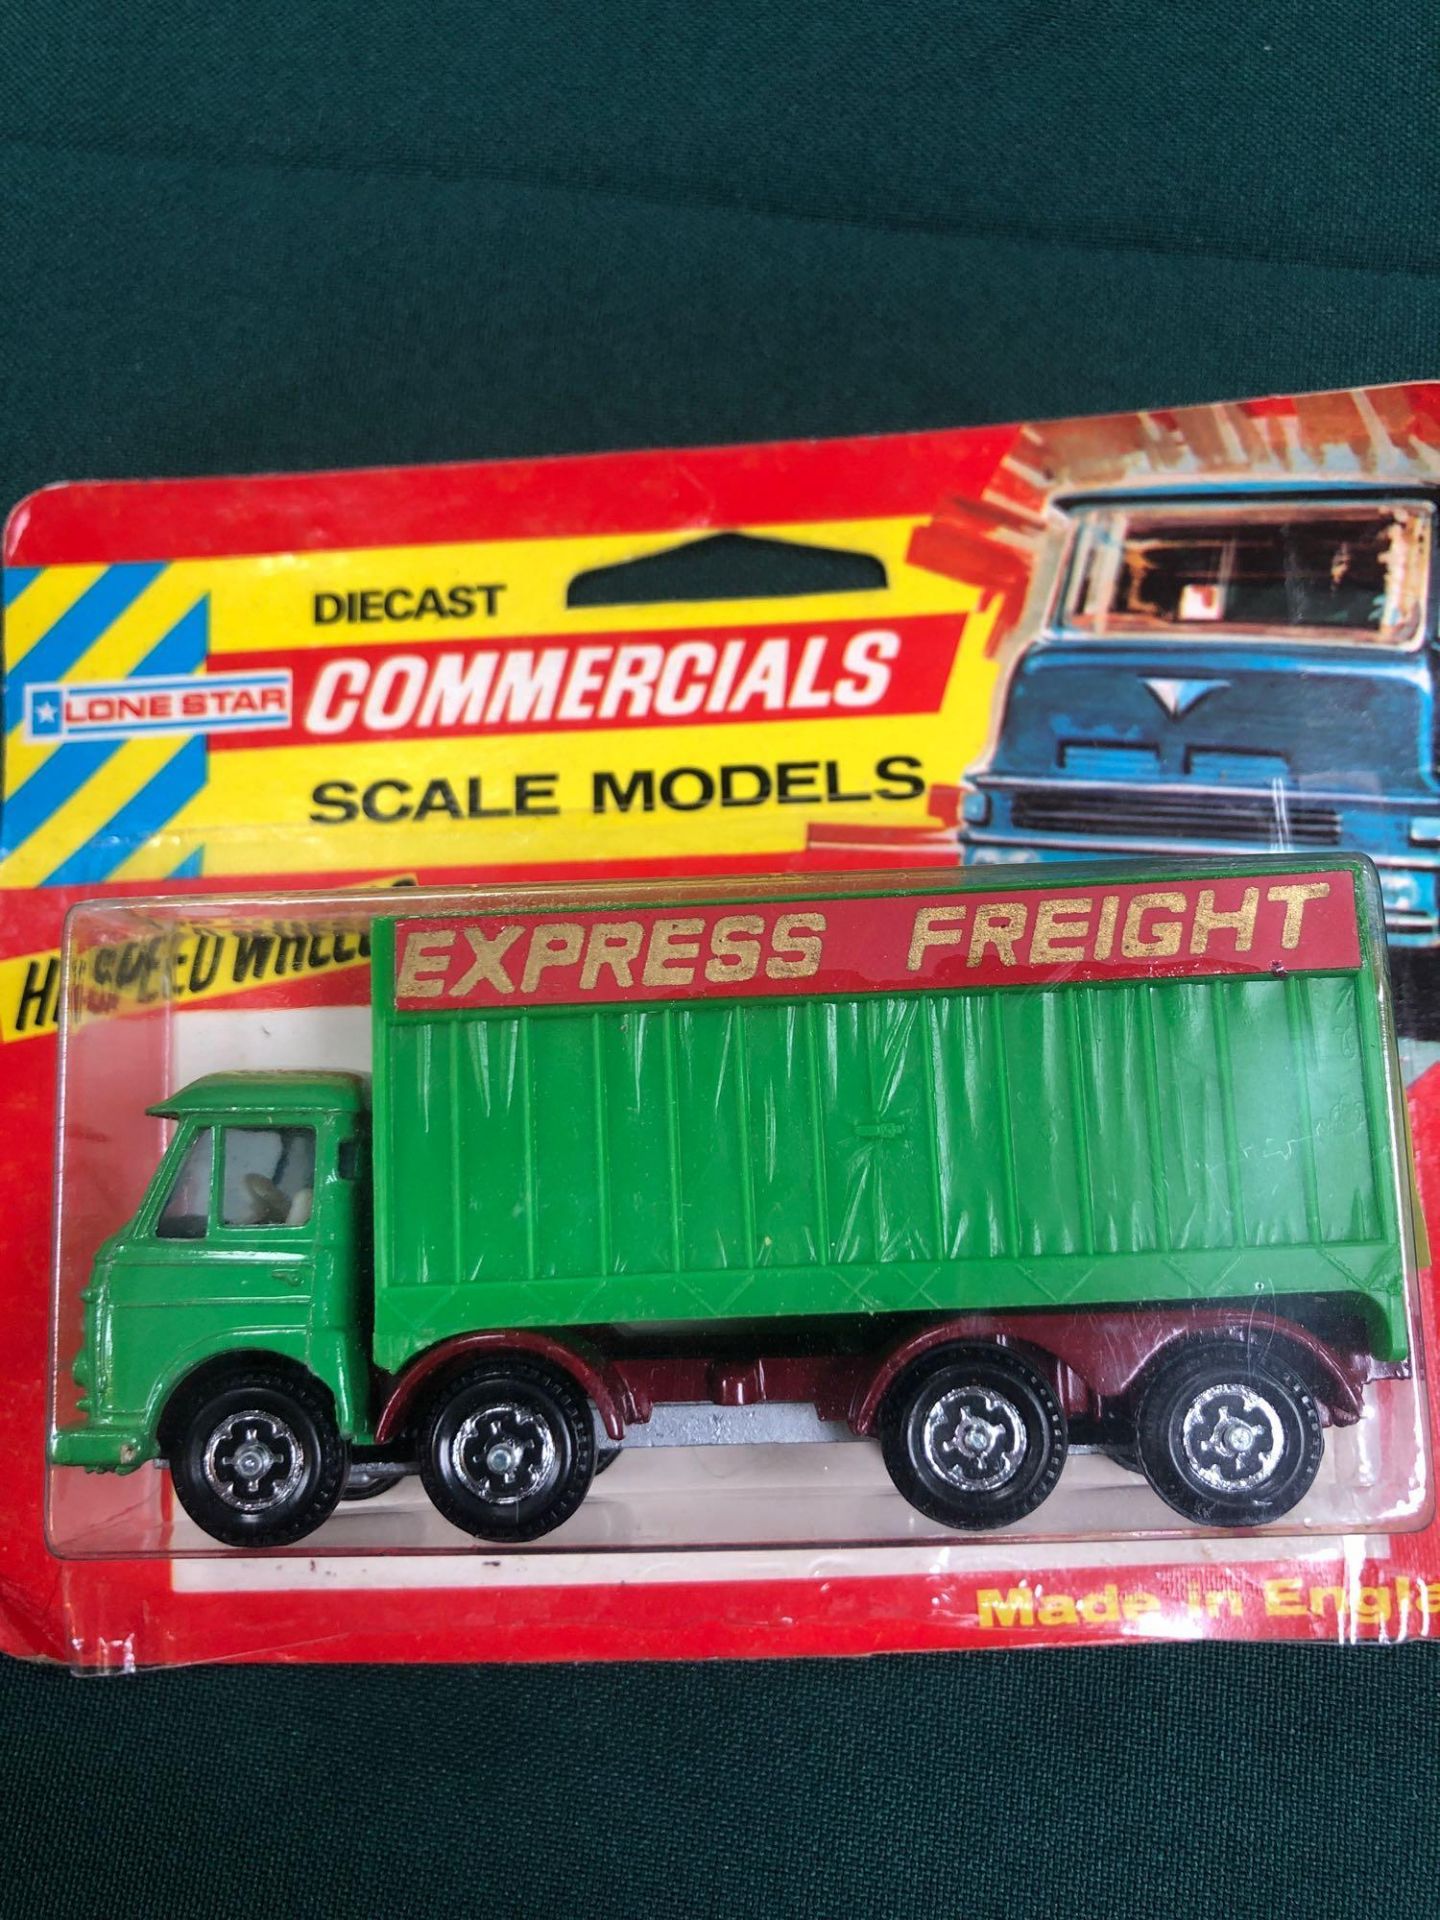 Lone Star Diecast Commercials Scale Models #29 Express Freight Truck On Bubble Card - Image 2 of 2